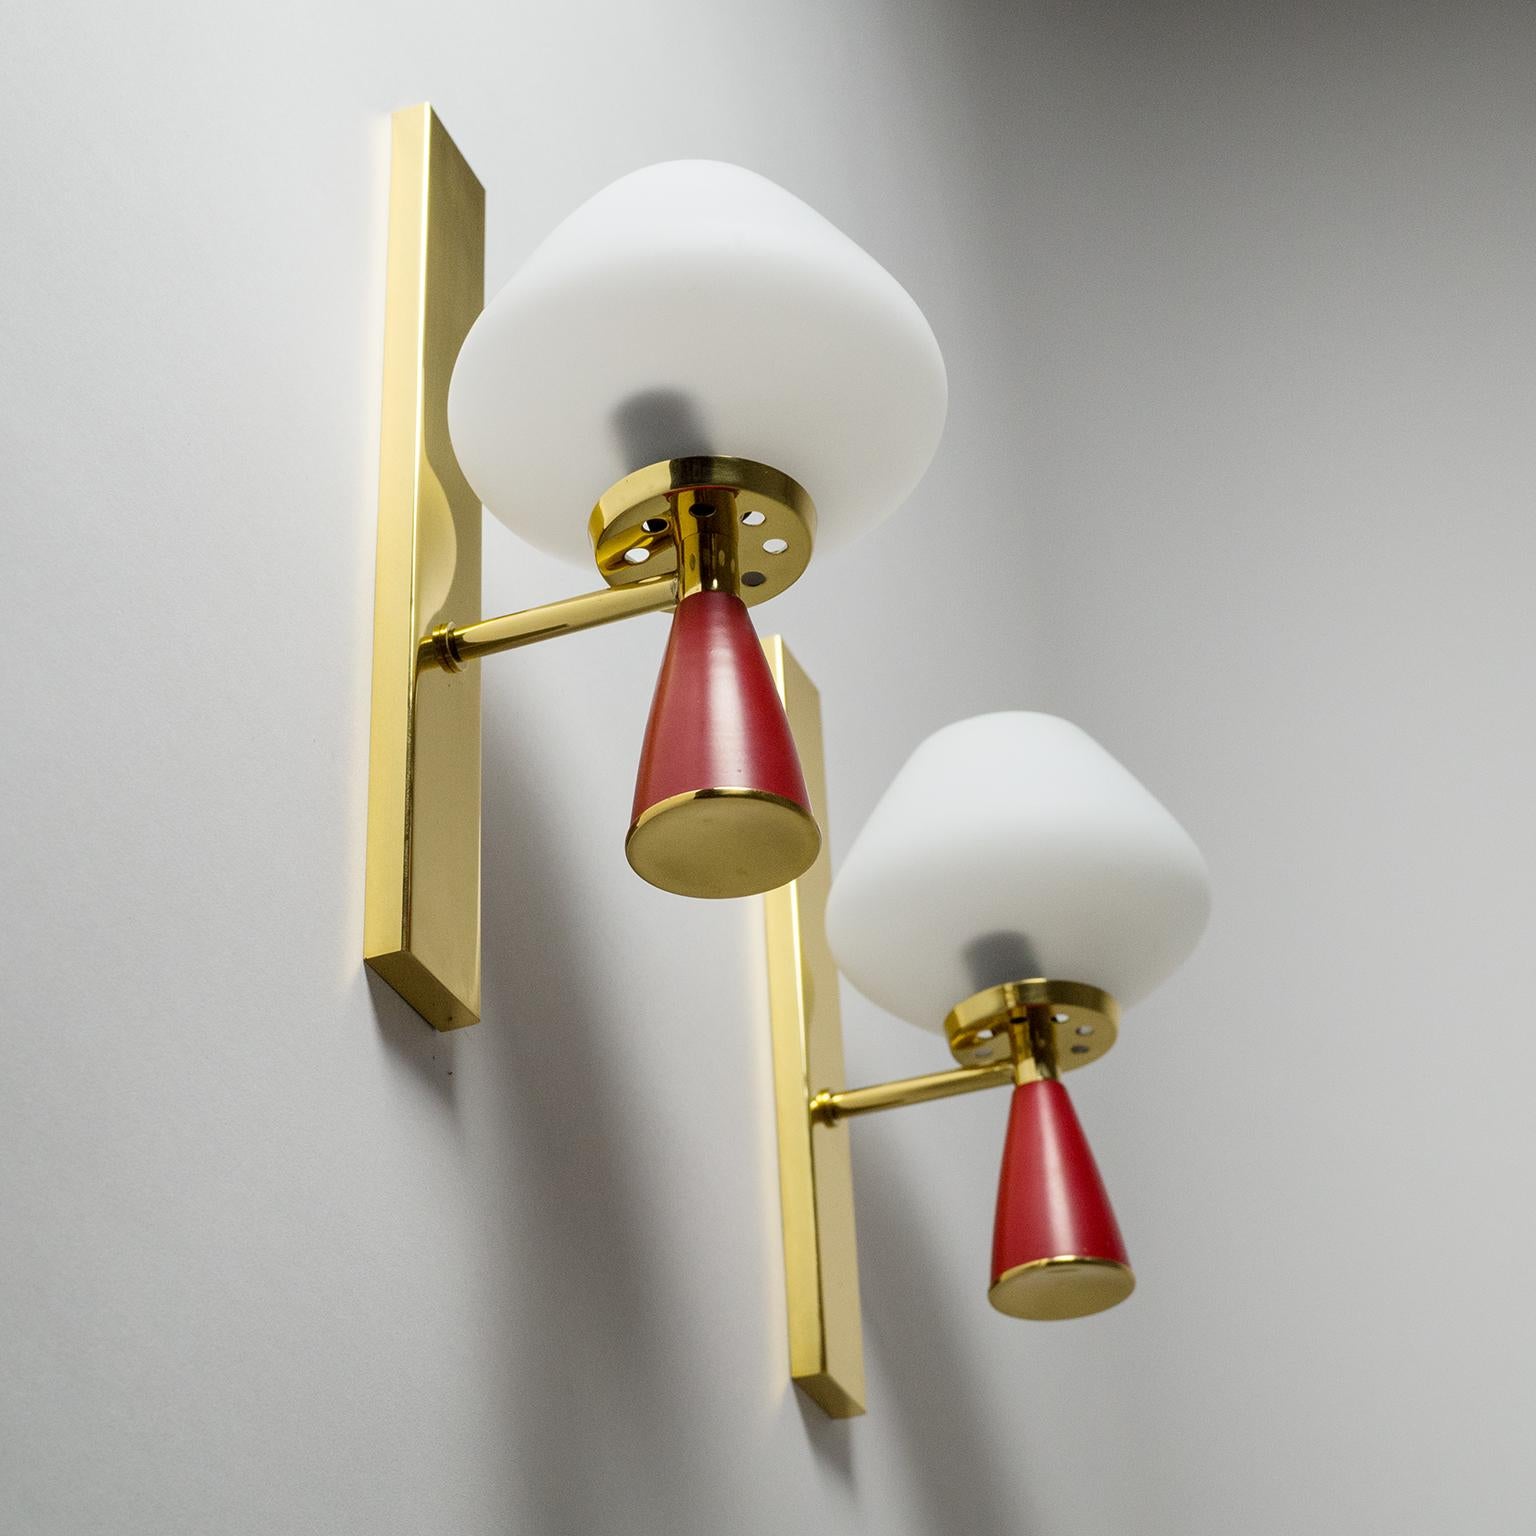 Italian Satin Glass Sconces, 1950s, Brass and Red 1